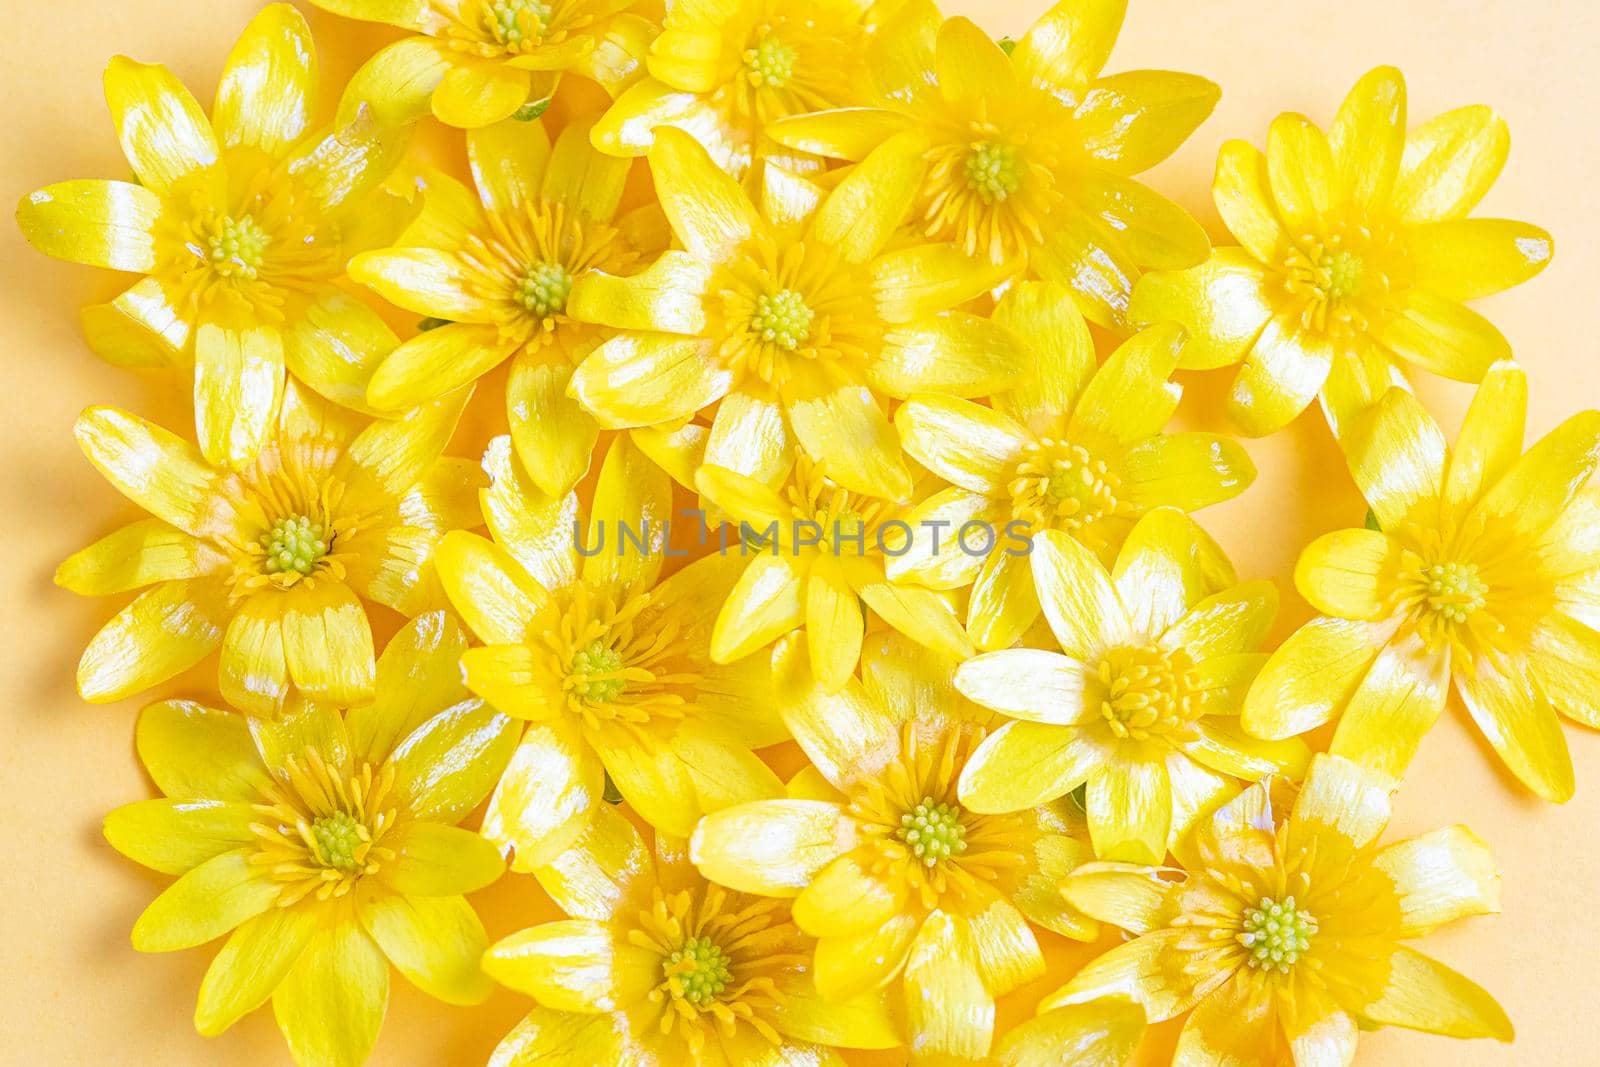 A scattering of yellow spring flowers on yellow background by galinasharapova